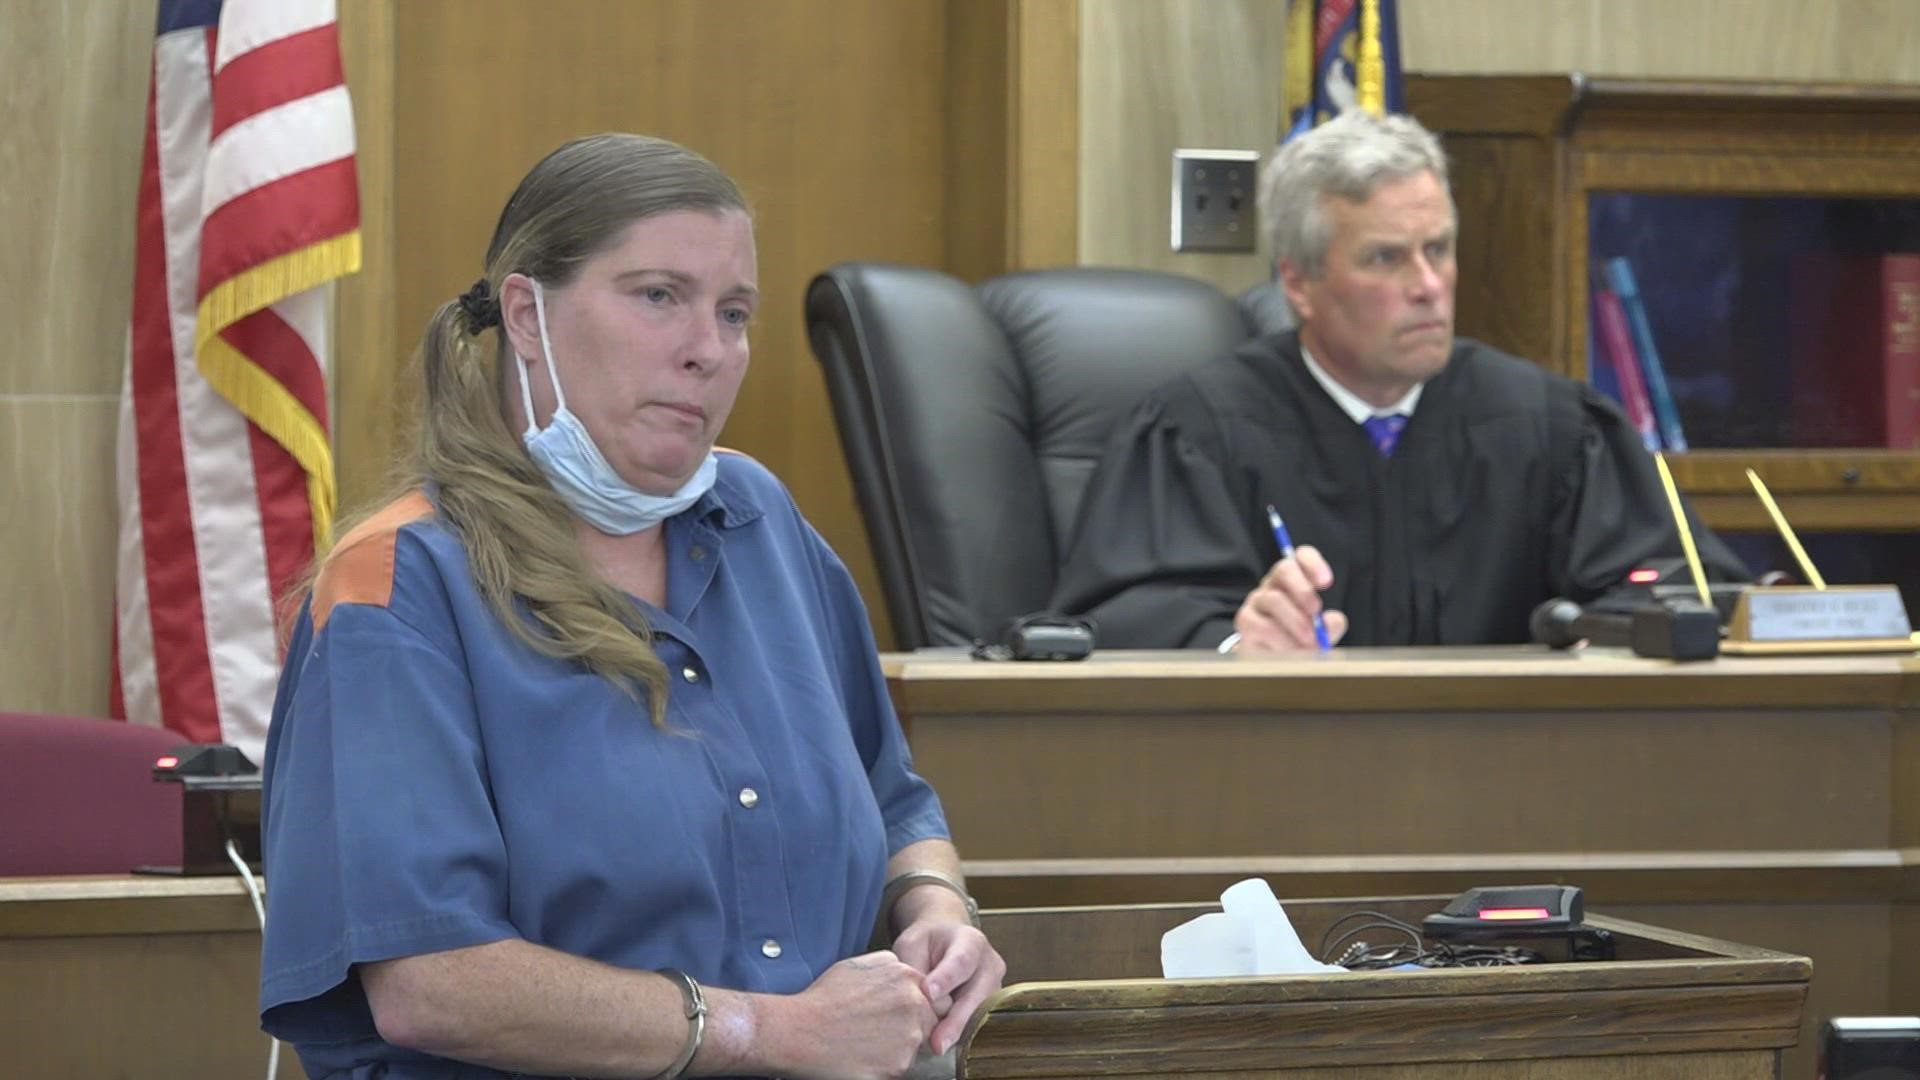 Amy Black's new sentence is 35 to 60 years in prison, which would include the 30 years she already served in the murder of David VanBogelen.